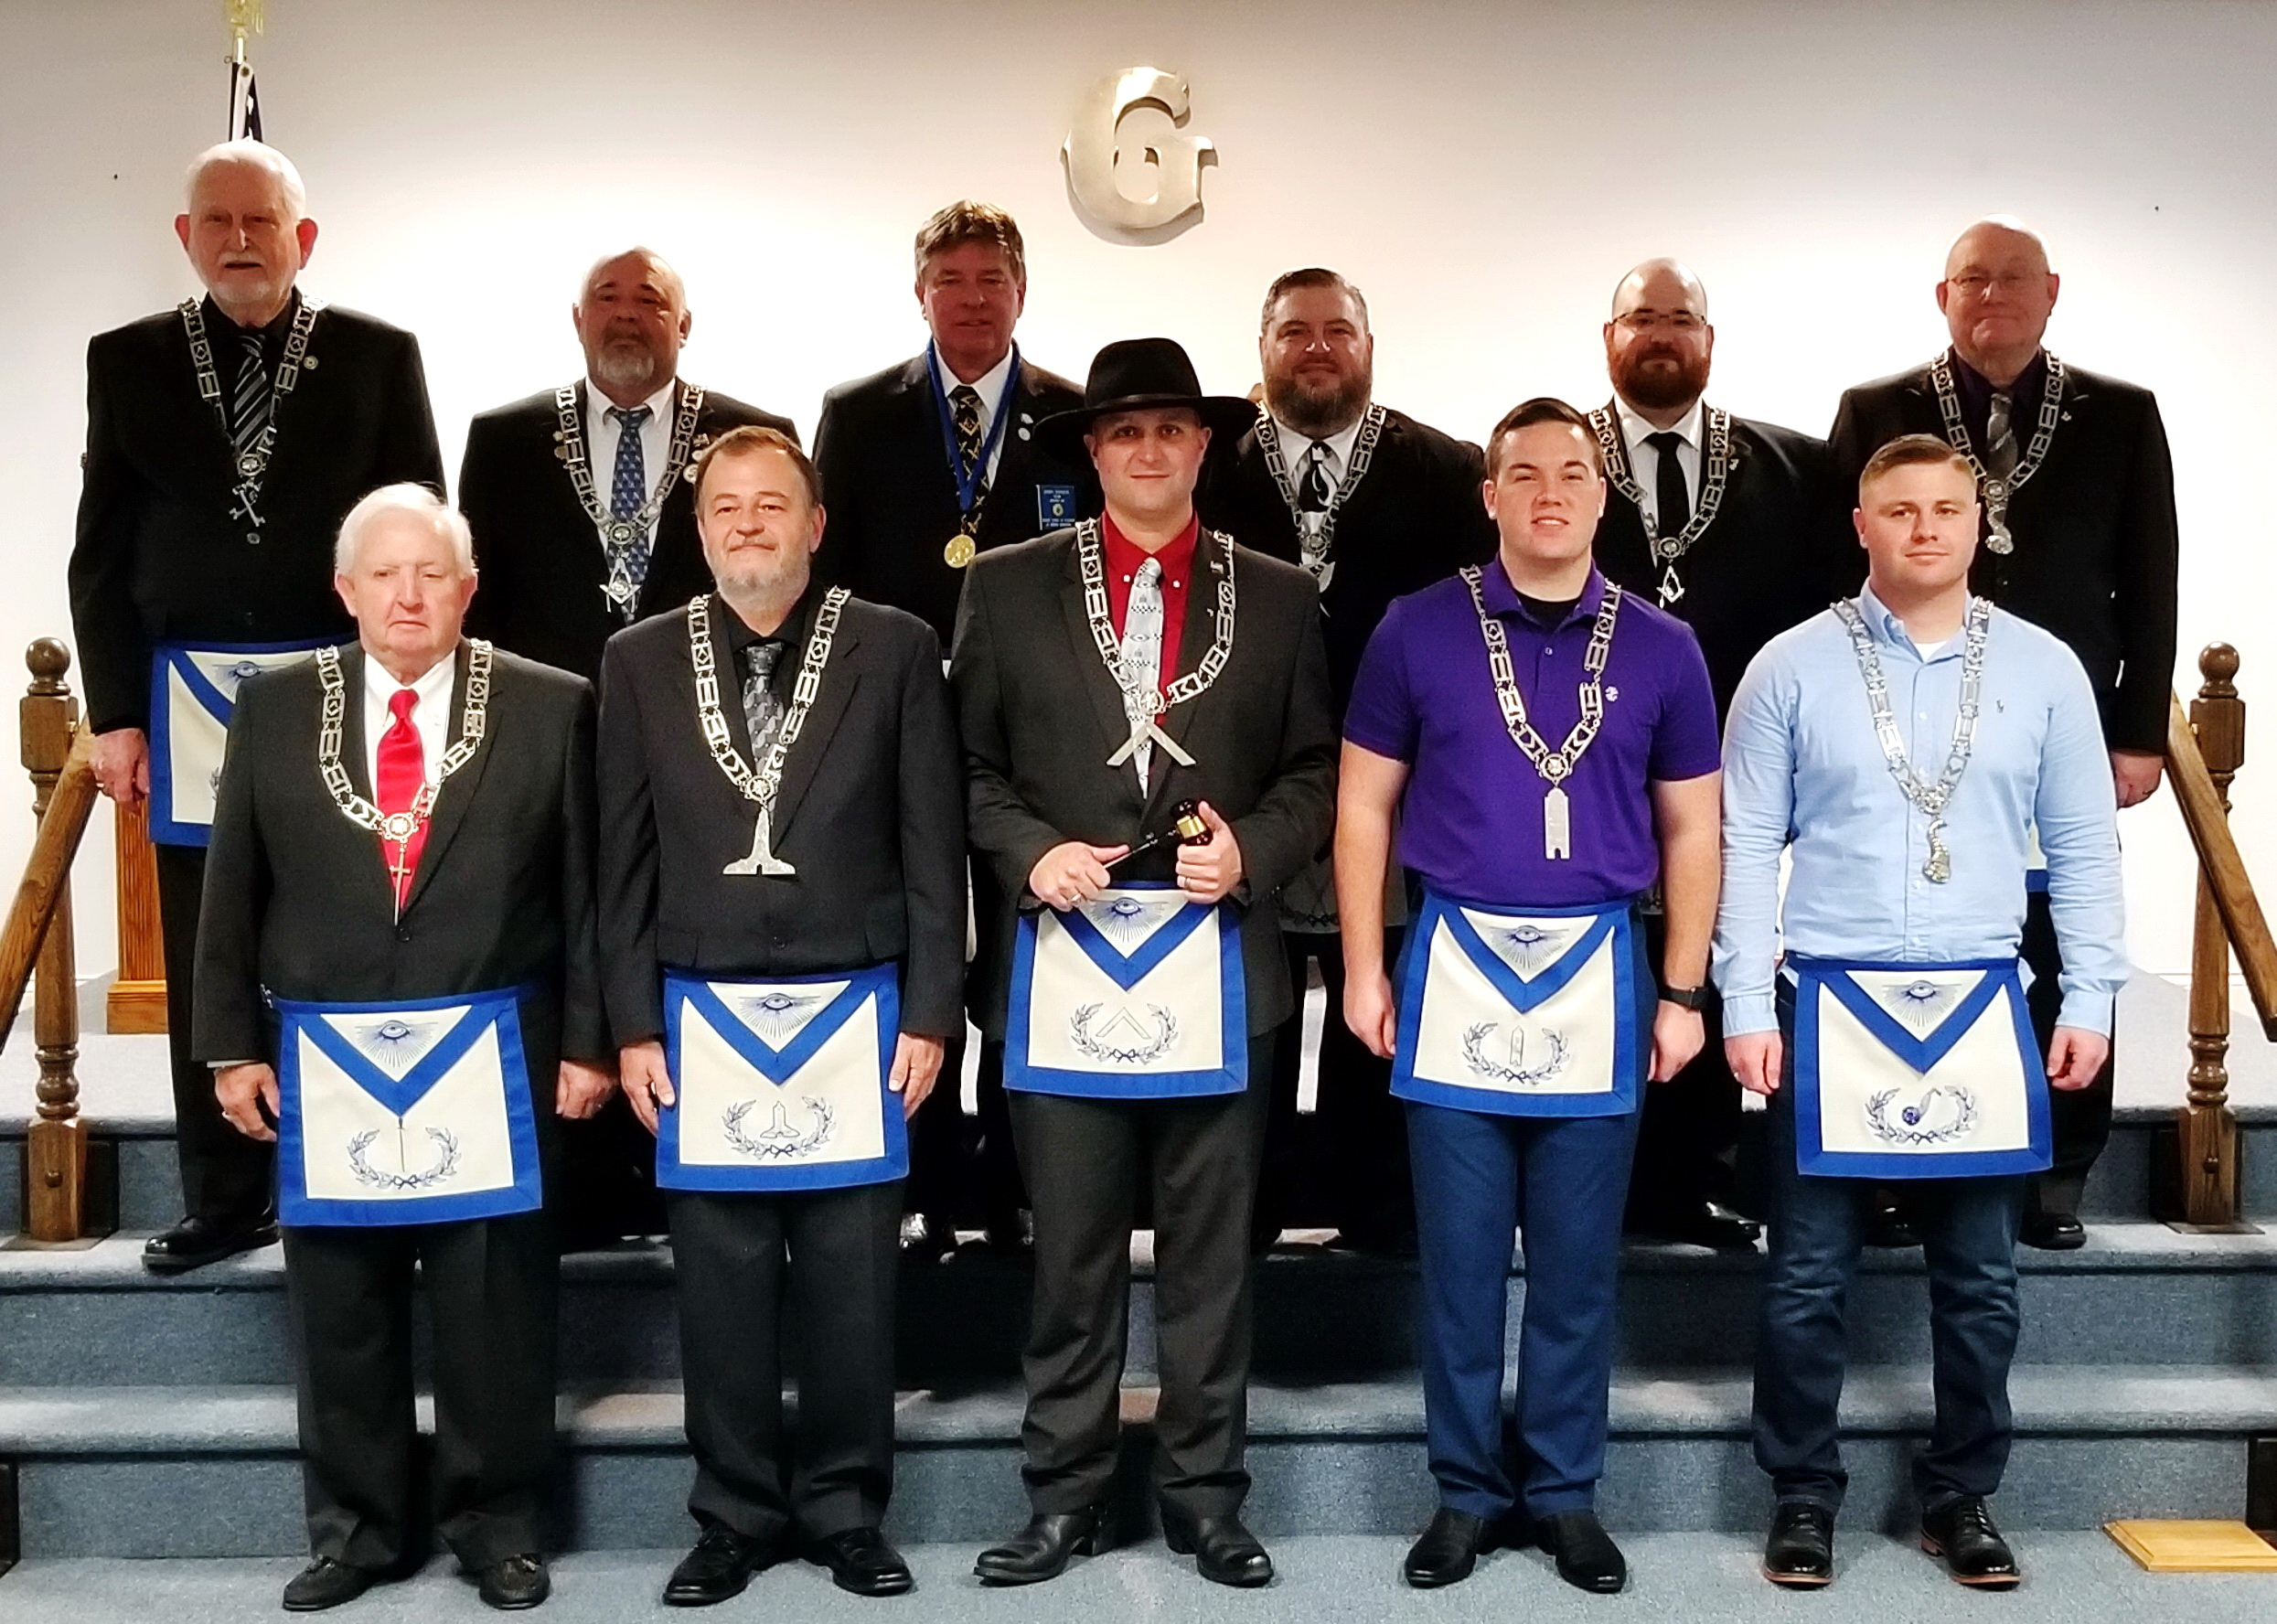 Union Lodge #618 Installation of Officers for 2020